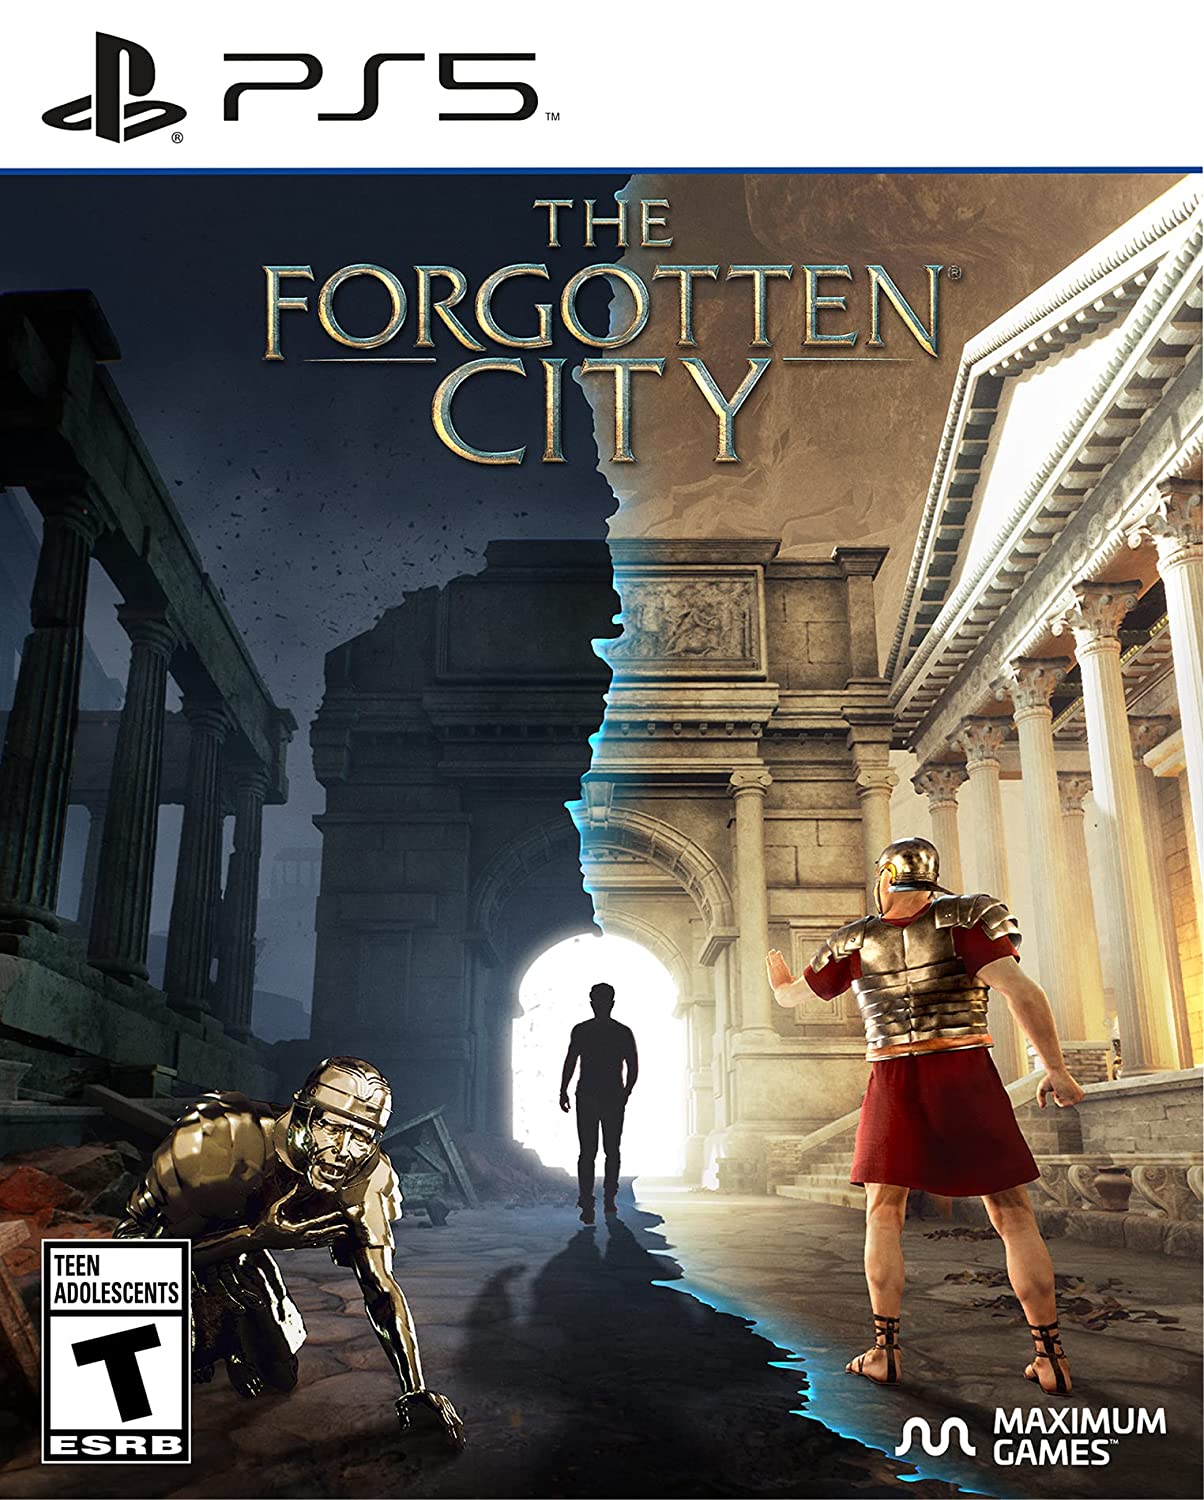 Video game image of "PS5: The Forgotten City"